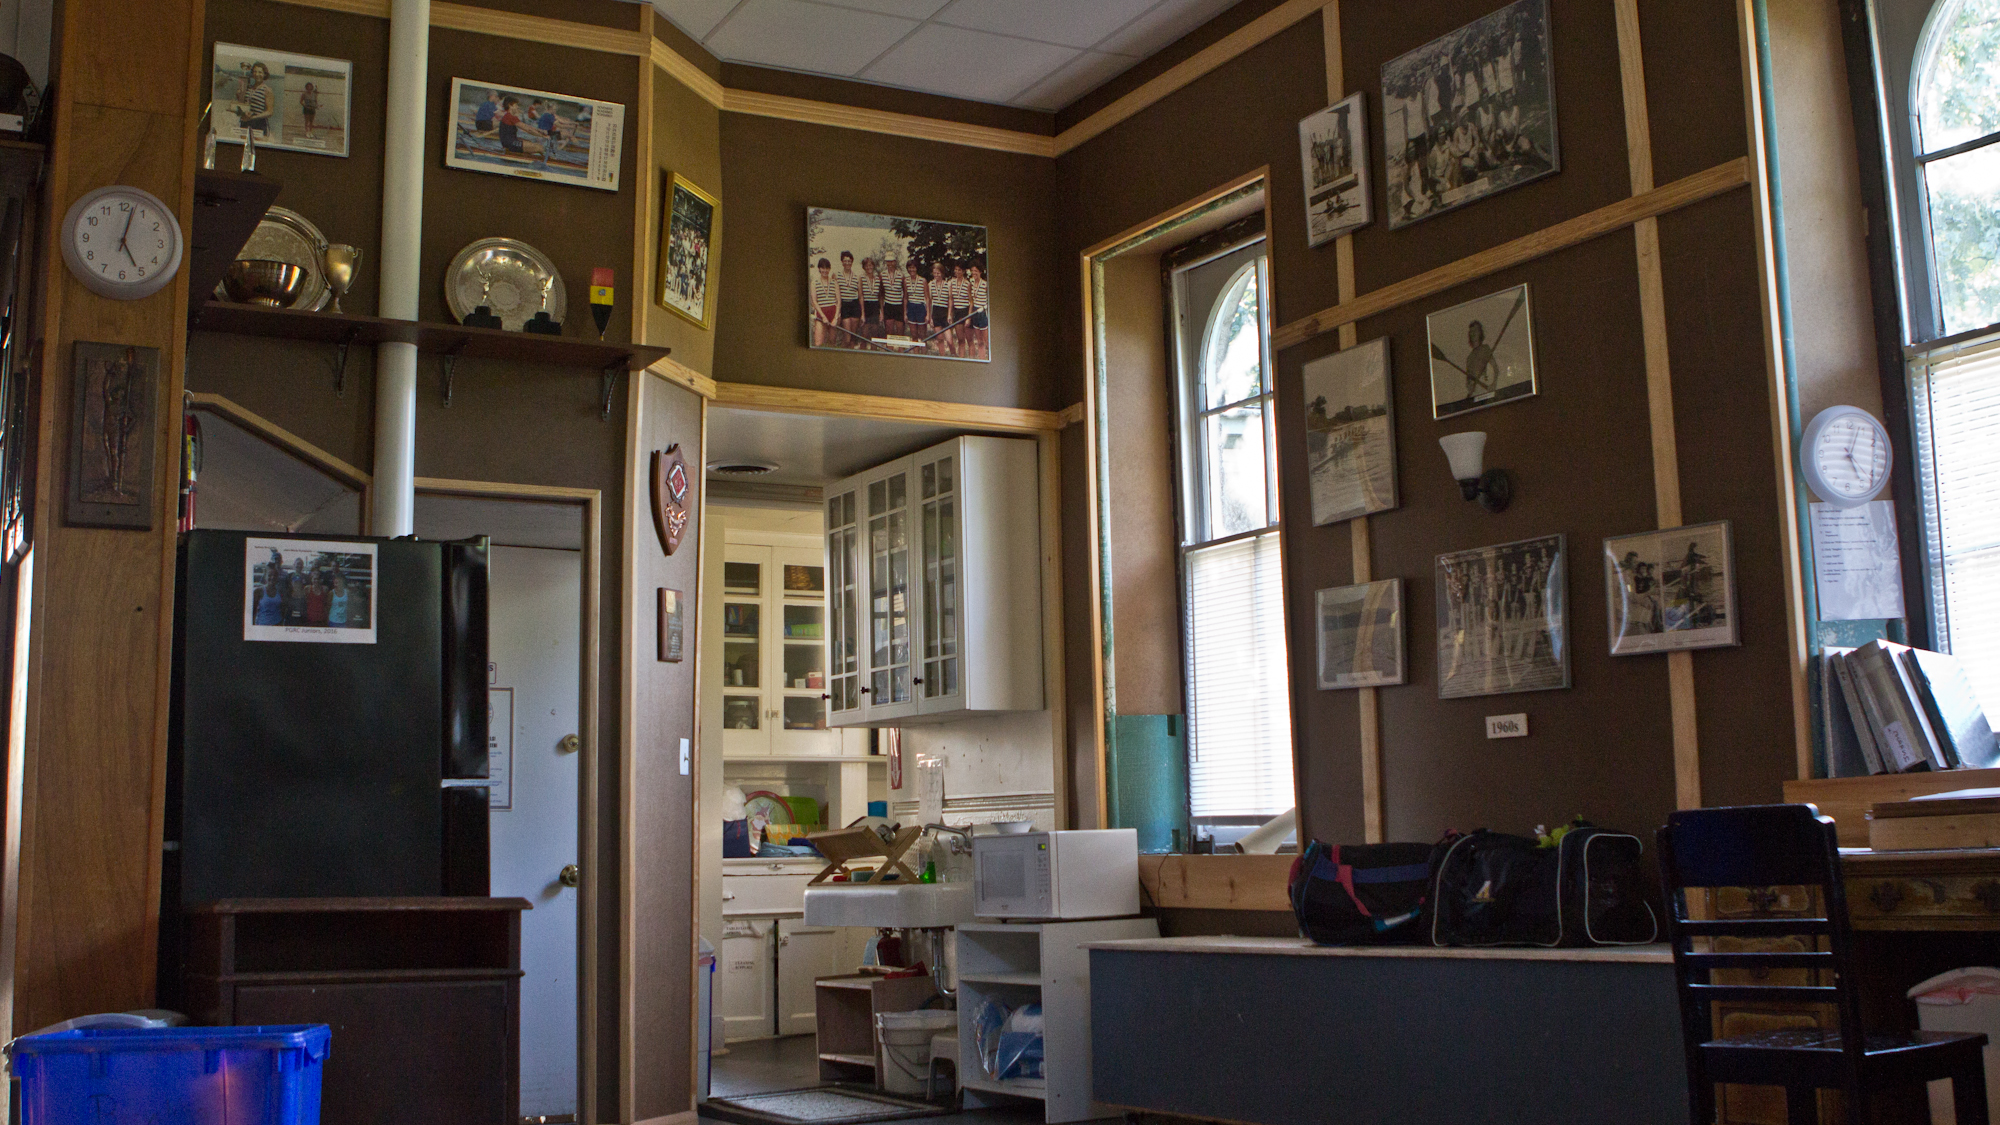 The Philadelphia Girls' Rowing Club’s interior is filled with old photographs of members and memorabilia. (Kimberly Paynter/WHYY)